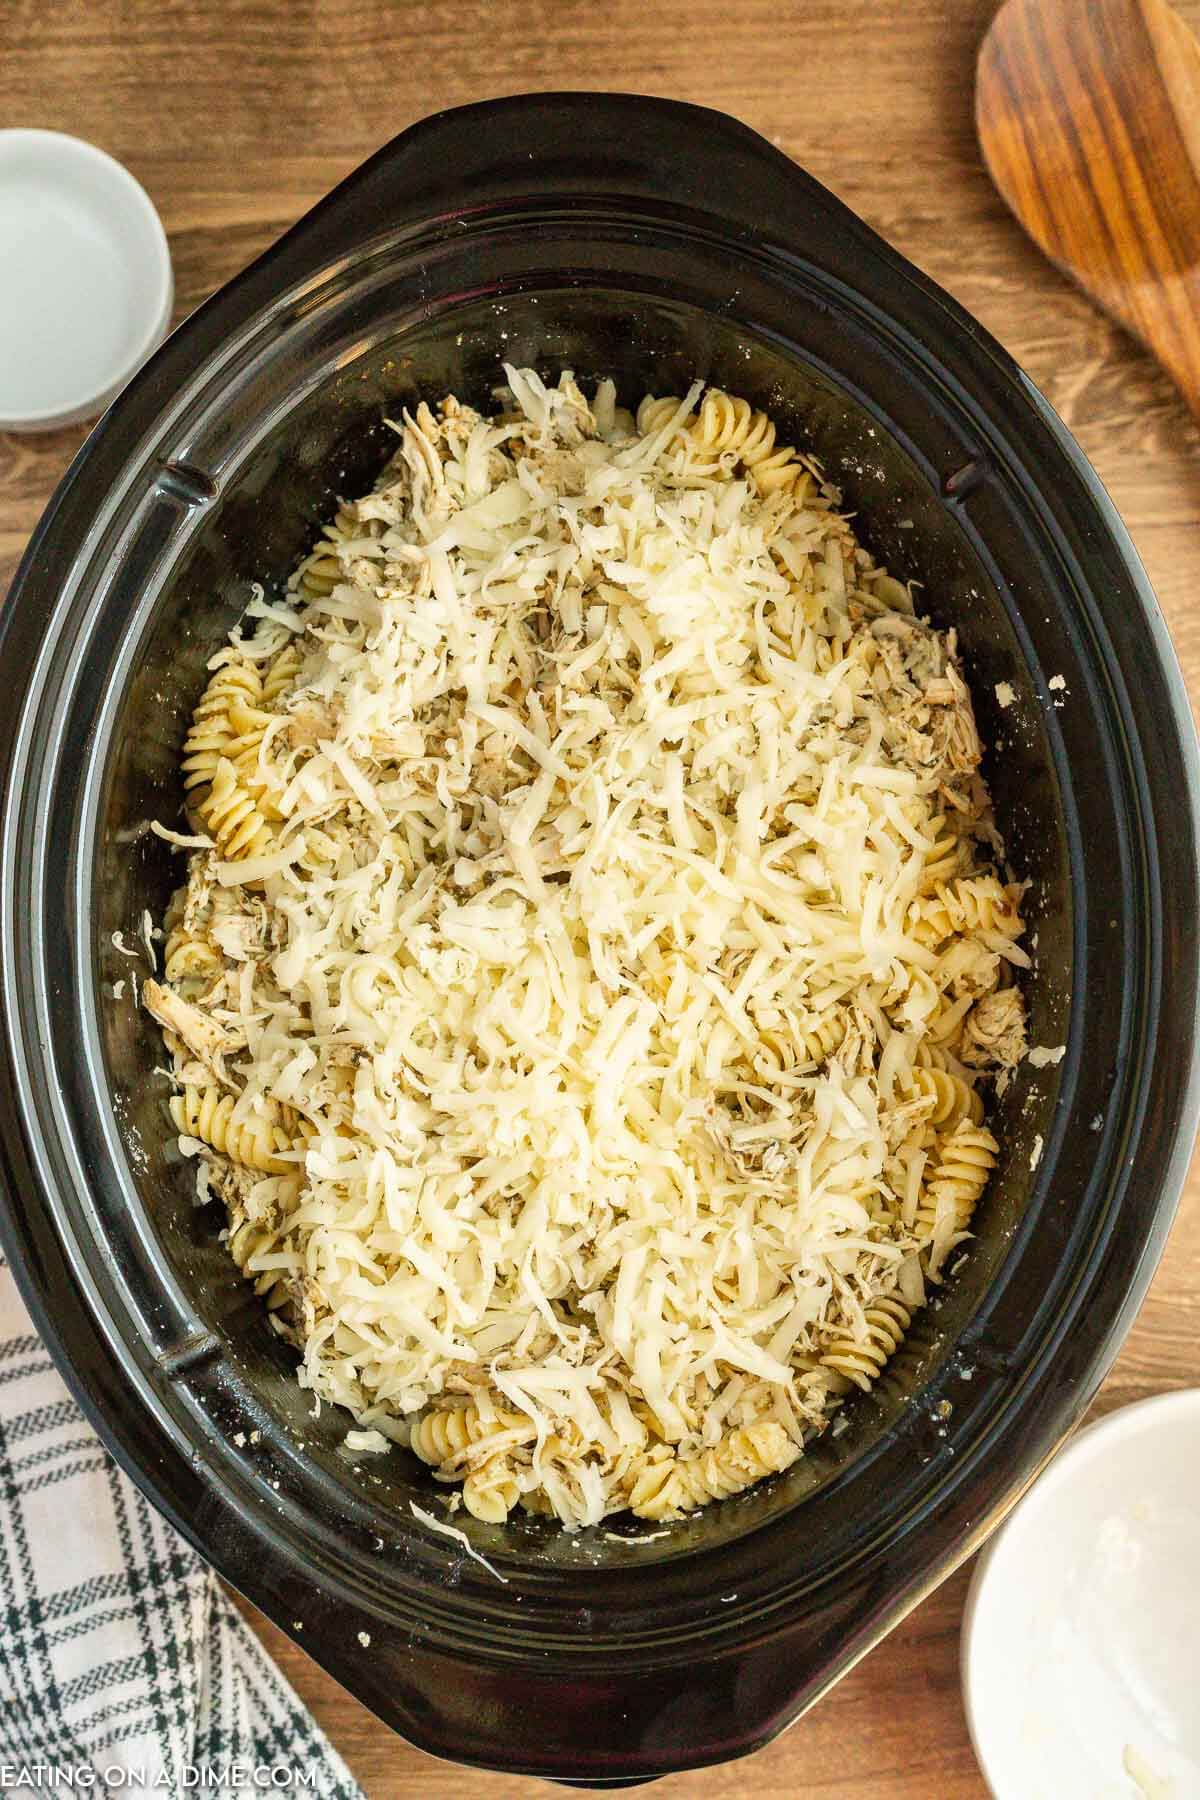 Topping the pesto chicken mixture with shredded cheese